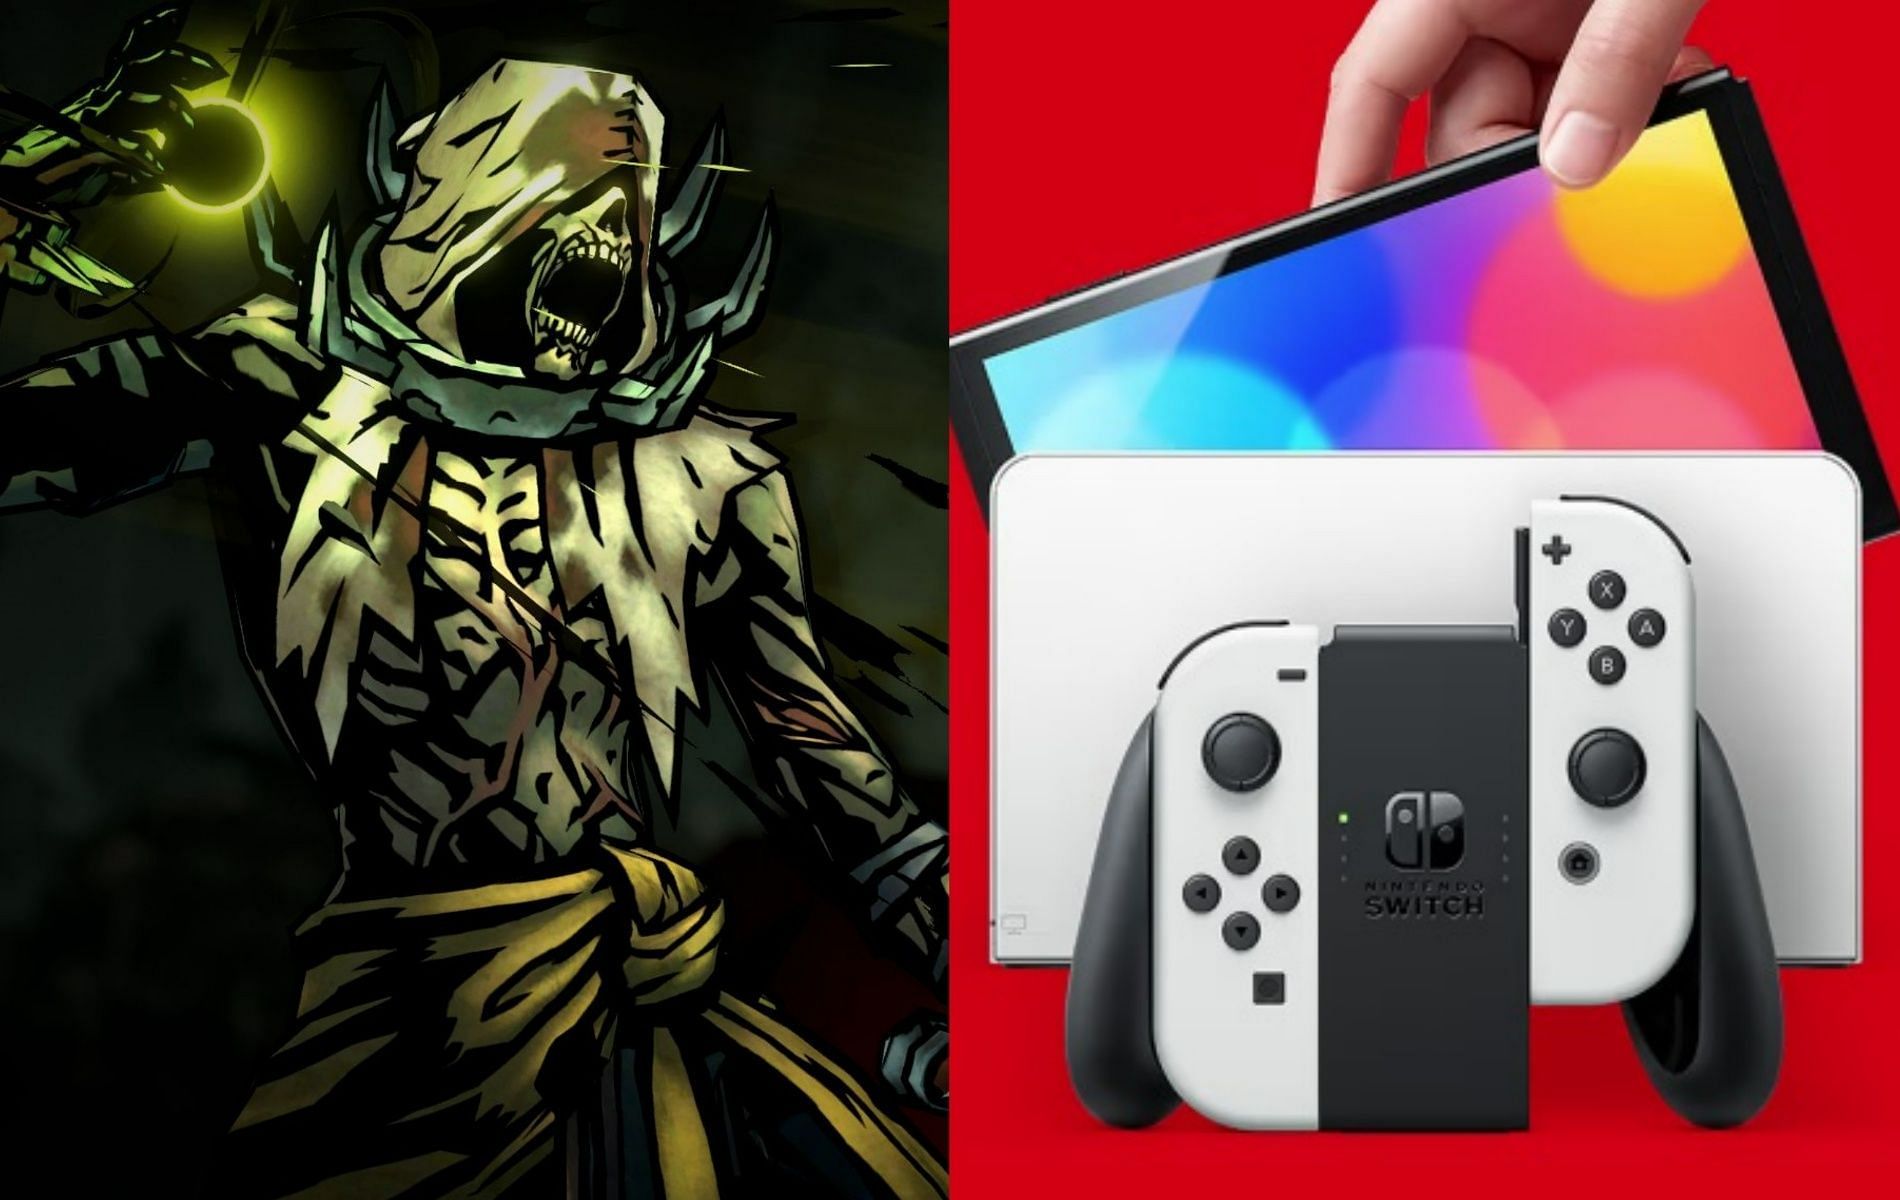 Darkest Dungeon 2 is likely to make its way to the Nintendo Switch by 2024 (Image via Darkest Dungeon 2 and Nintendo)